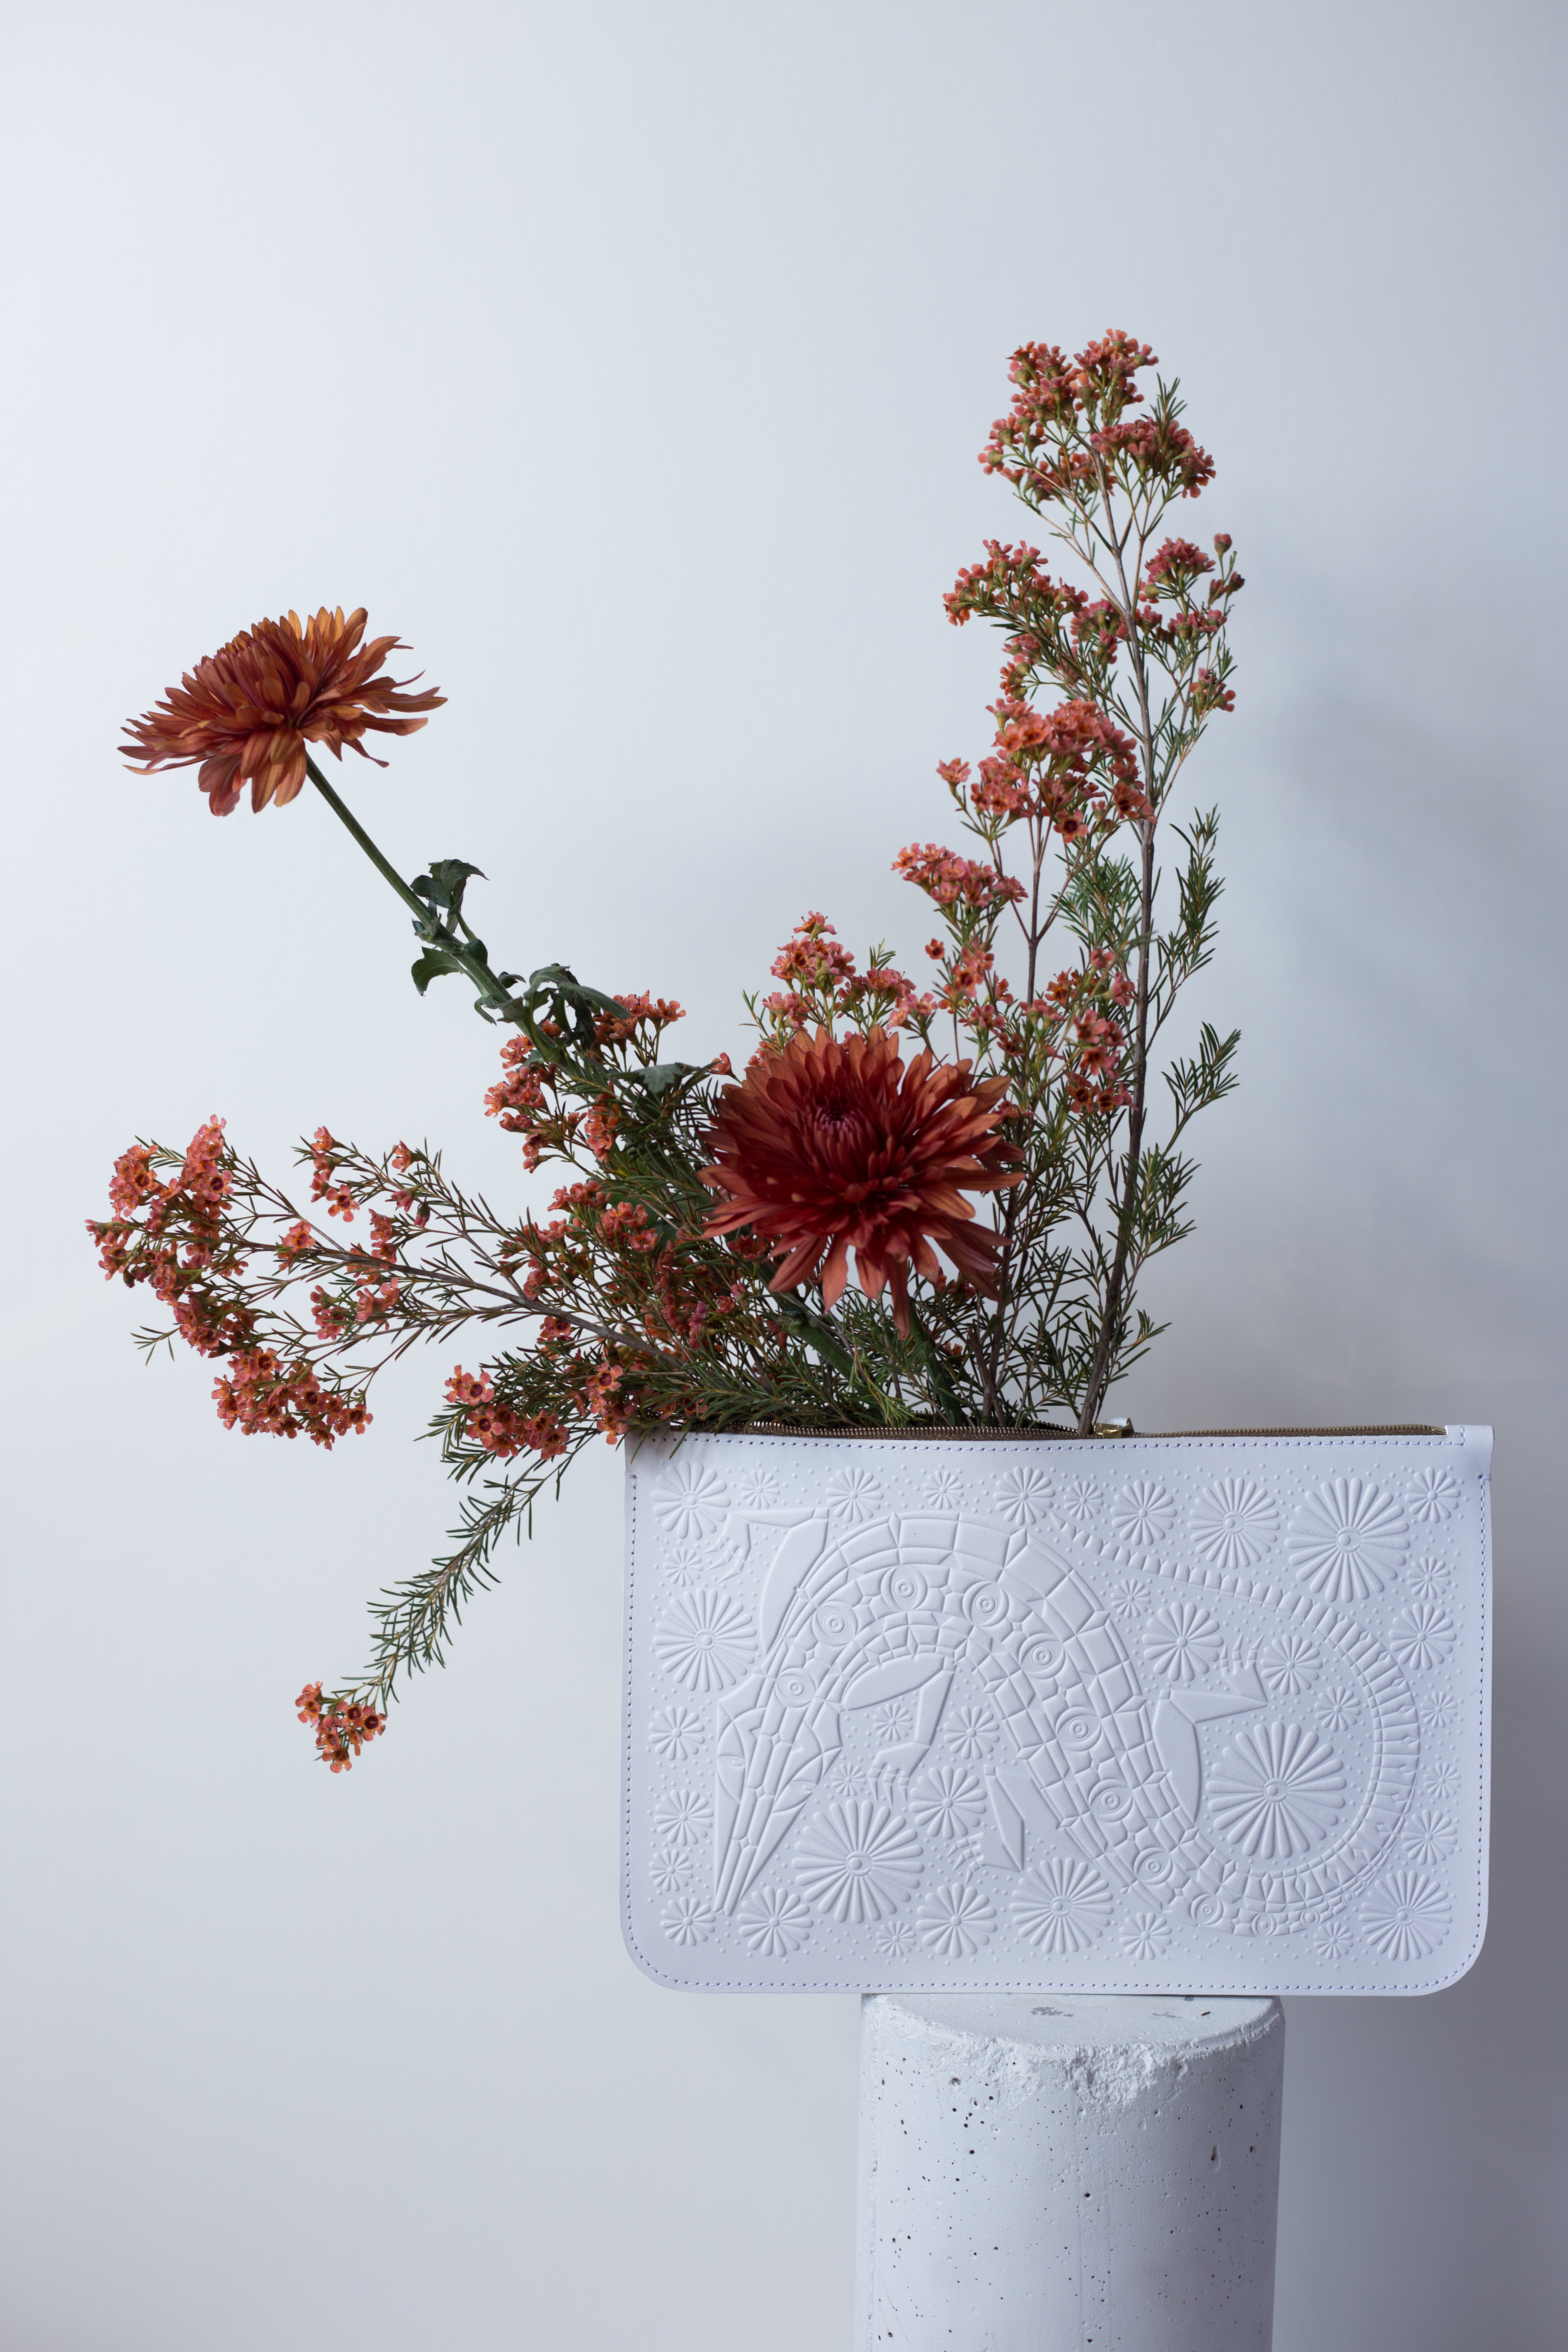 A large white leather clutch with a bold design on it, which includes a large slithering snake or reptile. The clutch is sitting on a white pedestal and has red flowers coming out of the inside of the pouch. the image is captured on a white backdrop. 